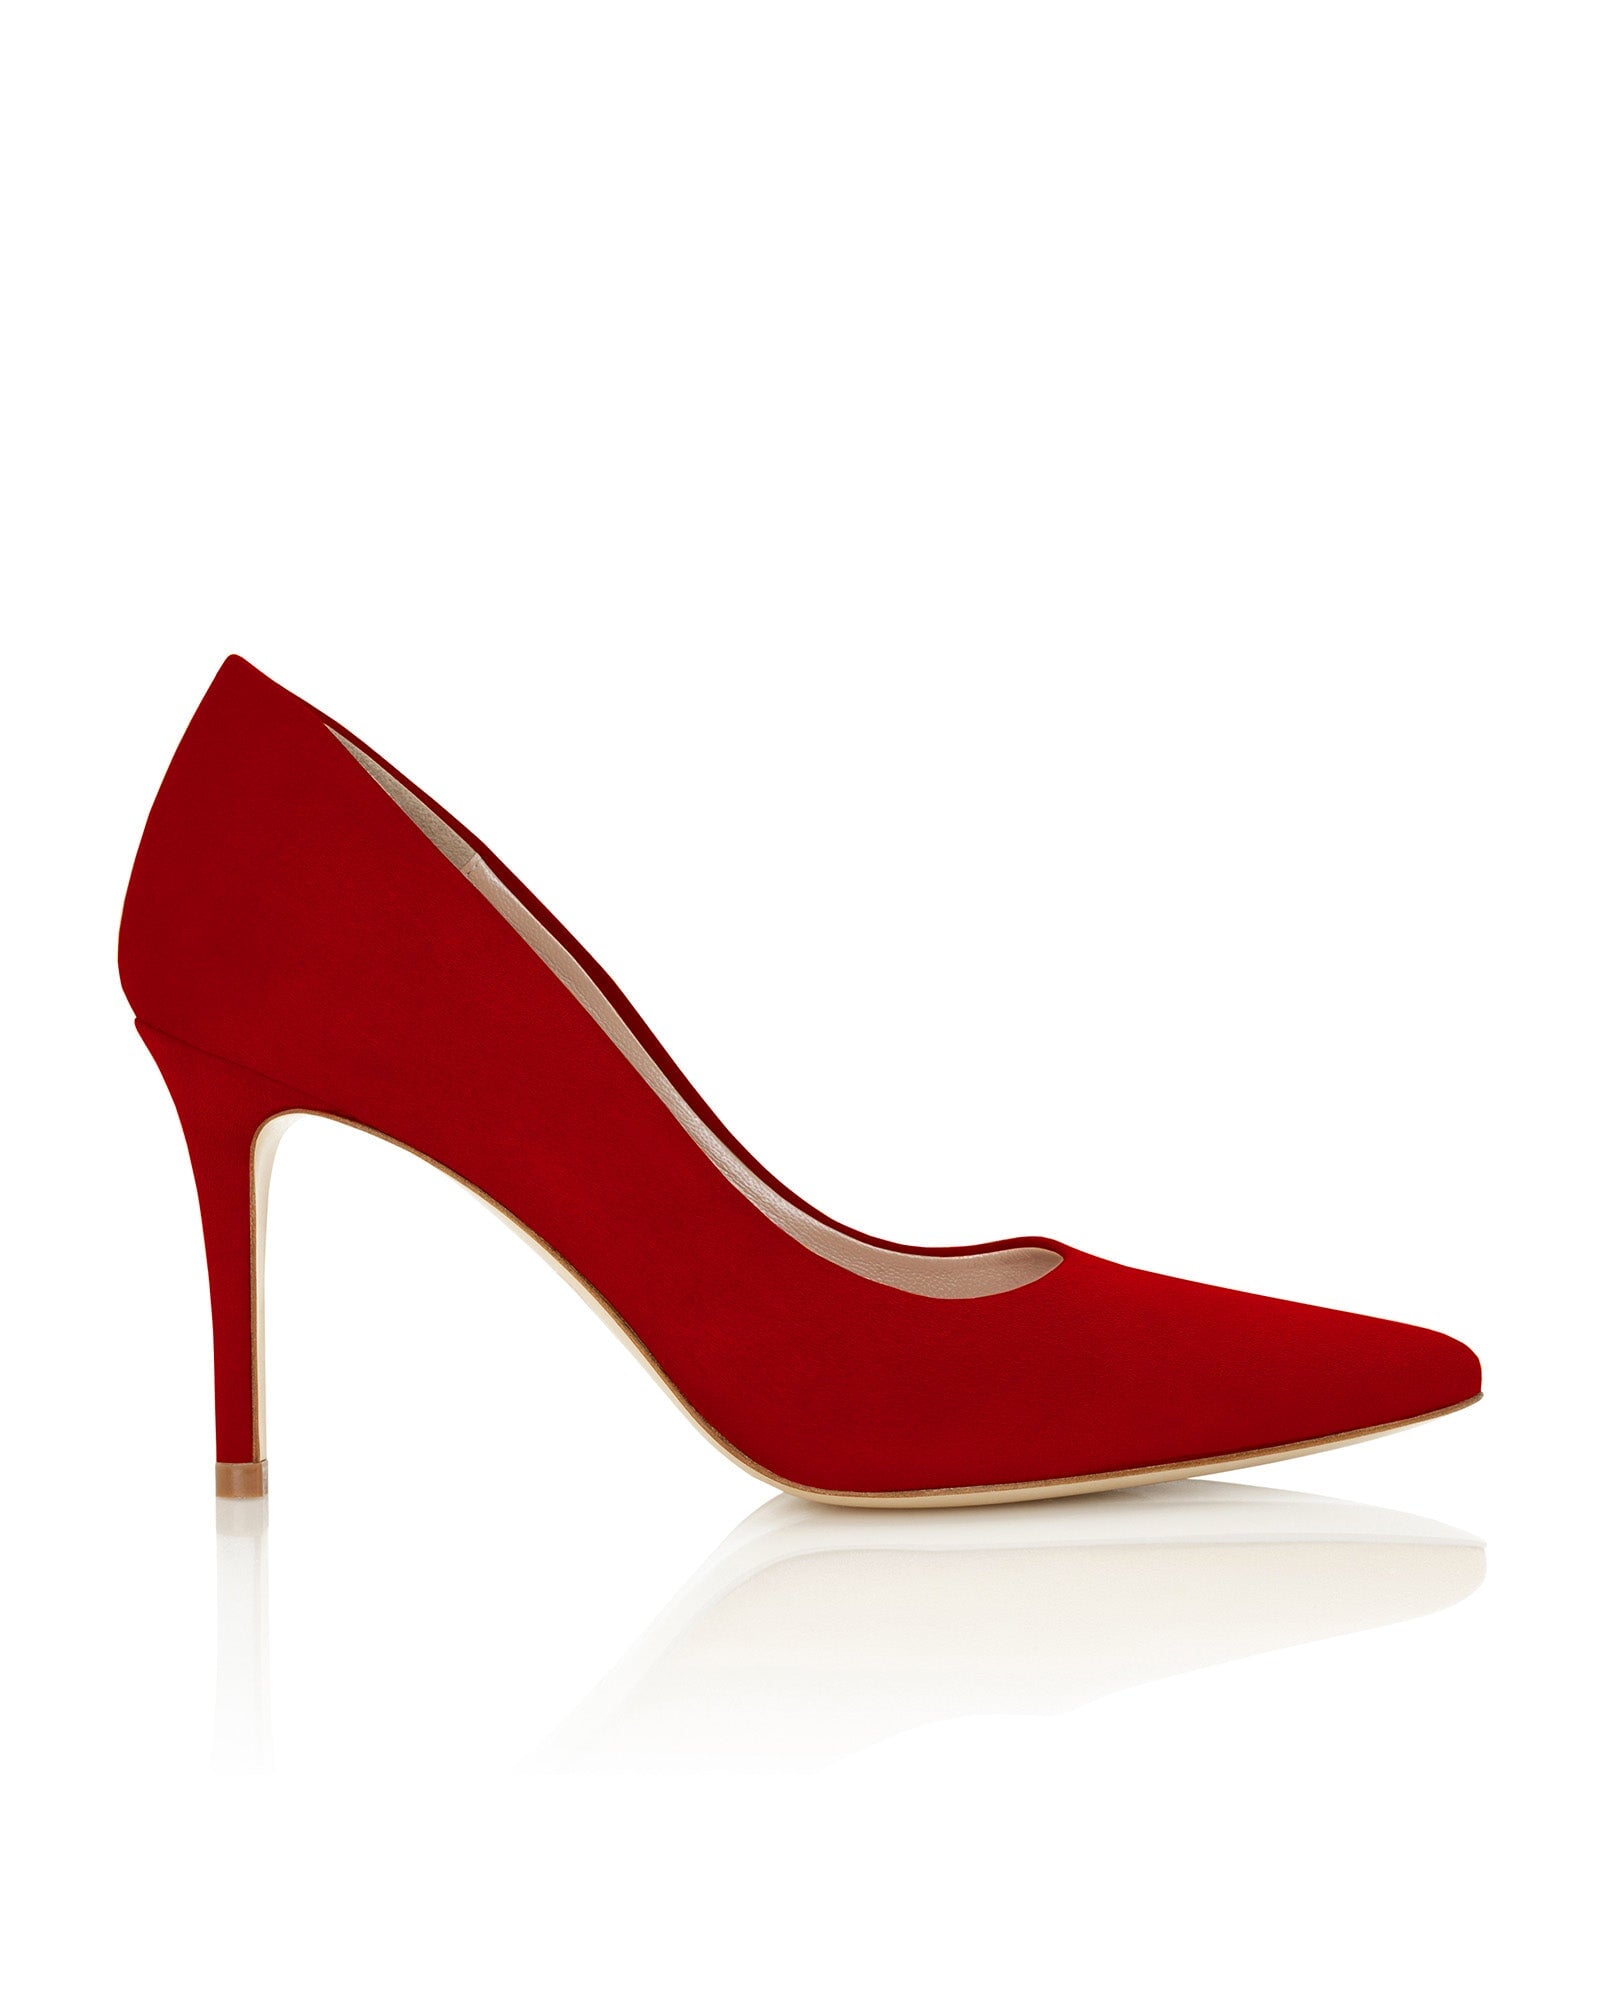 Claudia Candy Fashion Shoe Bright Red Pointed Court Shoe  image